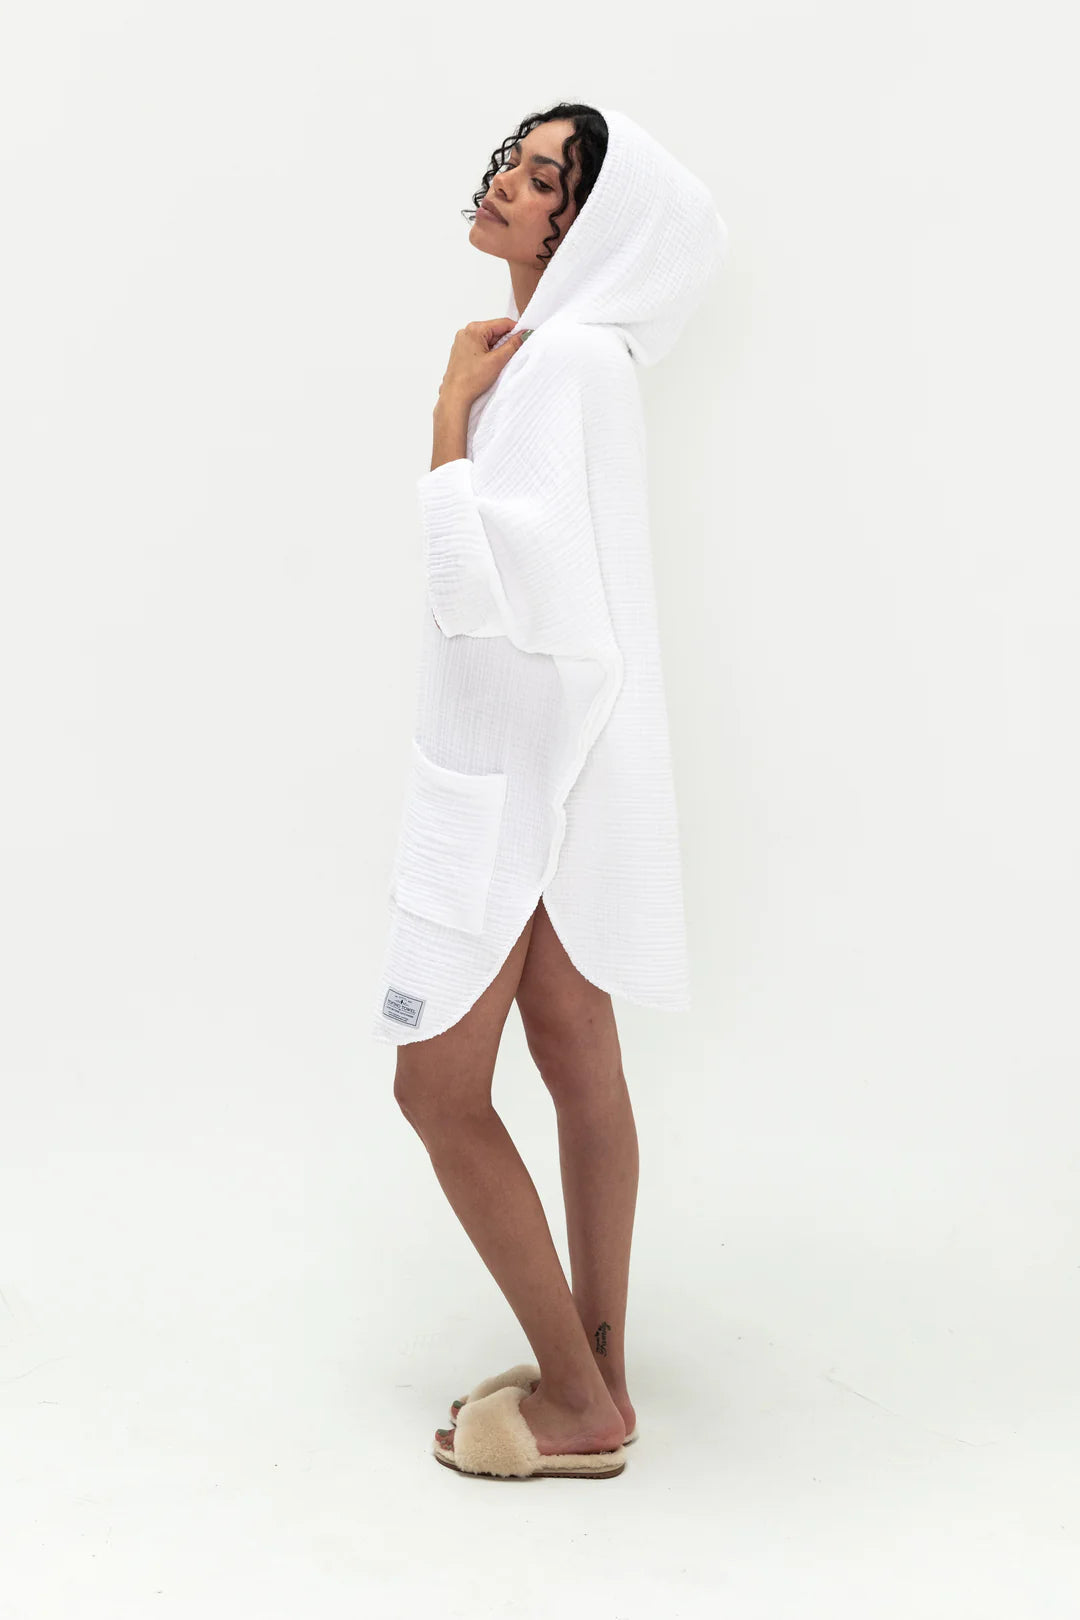 The Cocoon Surf Poncho in Seashell